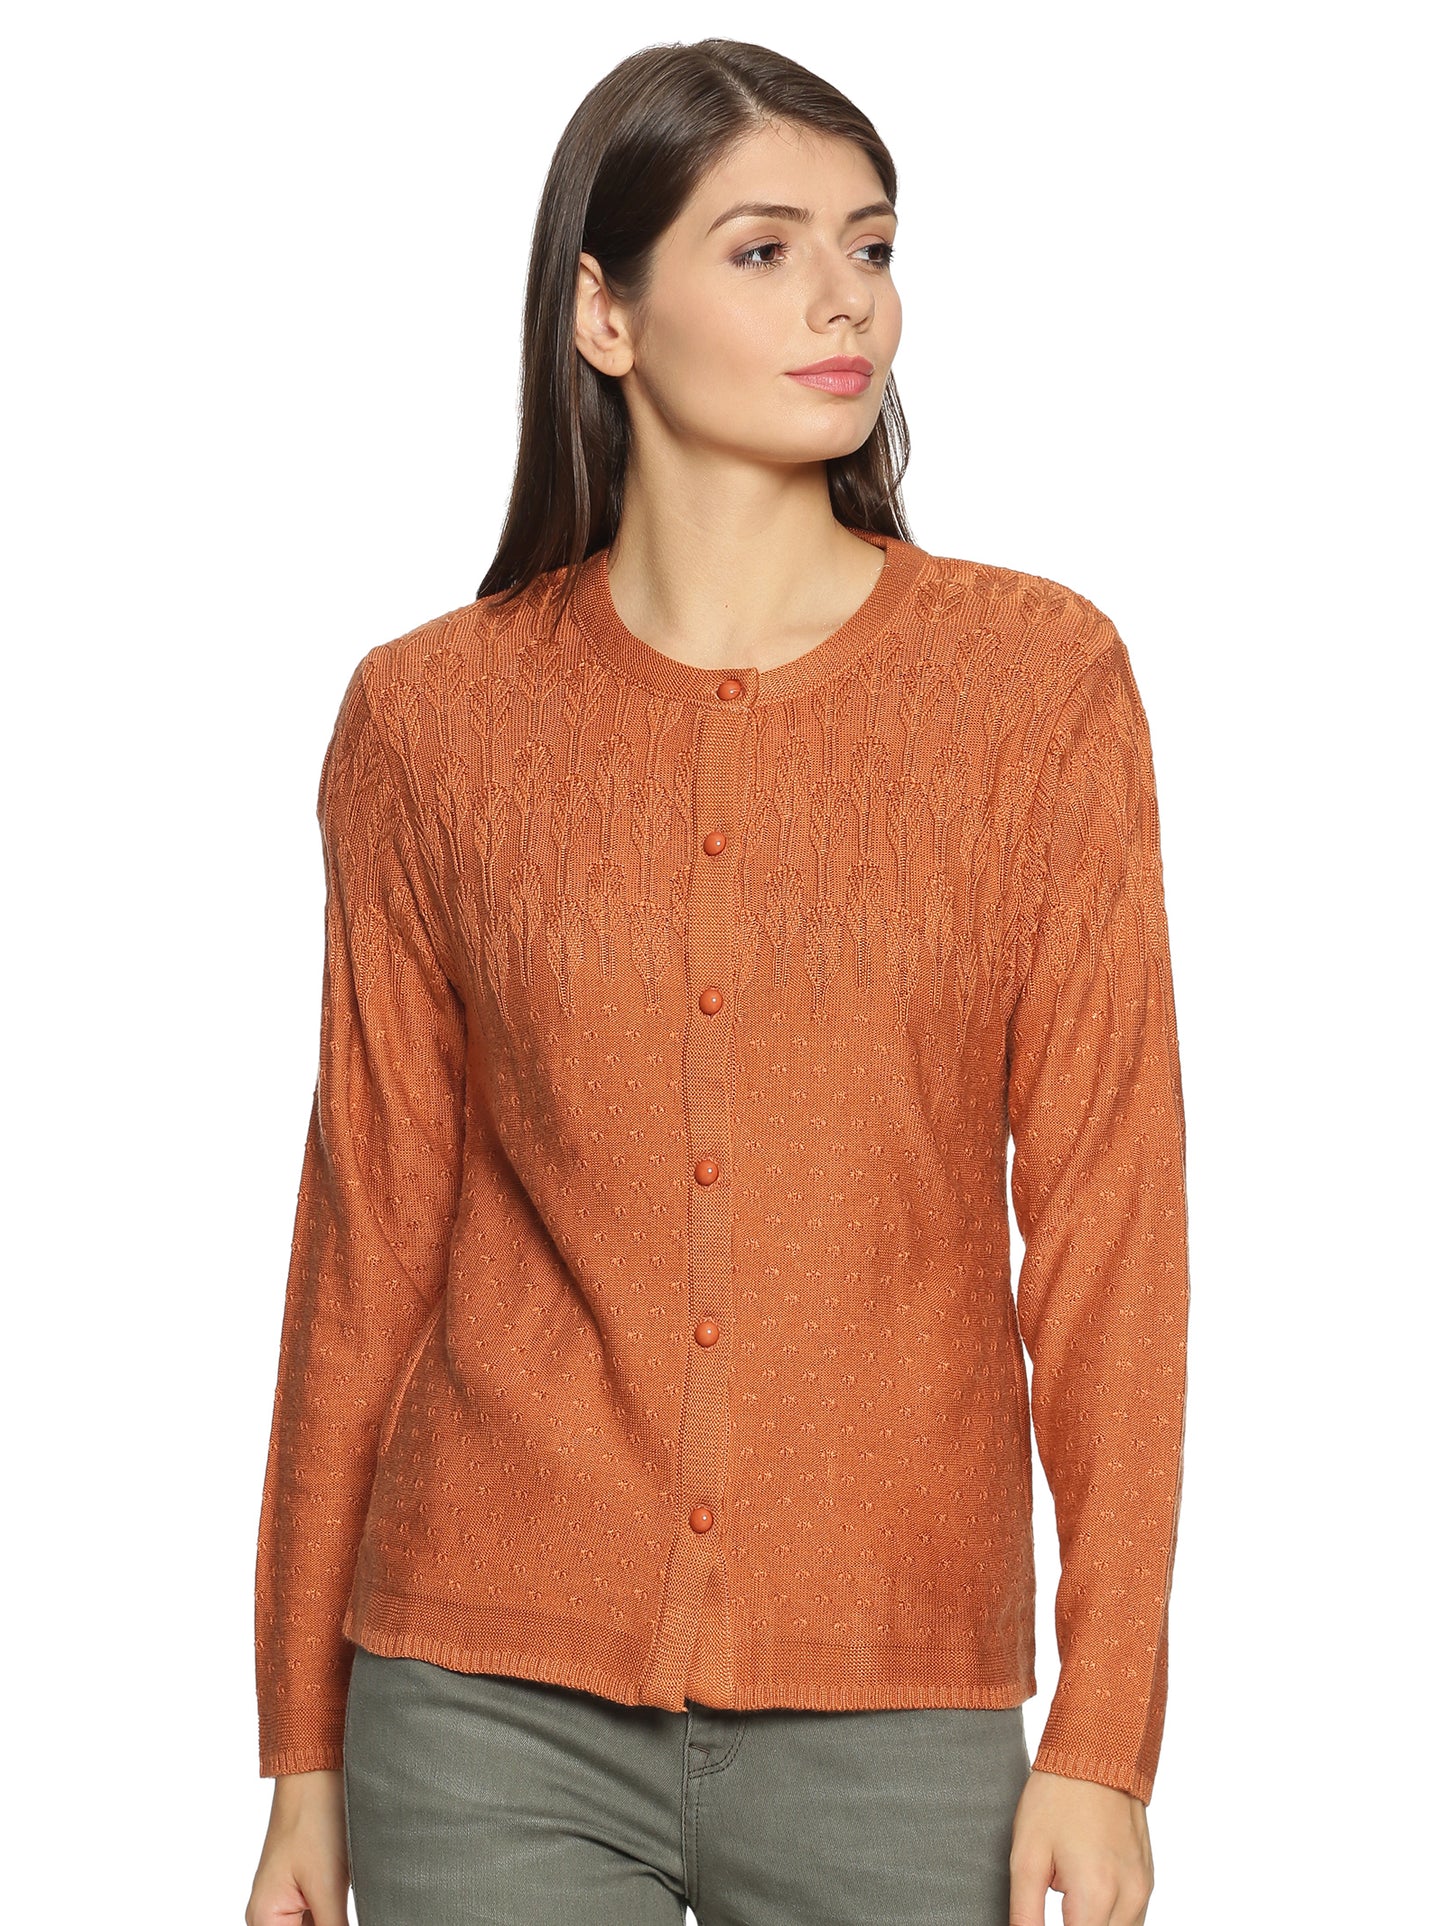 Clapton Acrylic Blend Round Neck Full Sleeve Casual Solid Winter Wear Cardigans For Women Orange